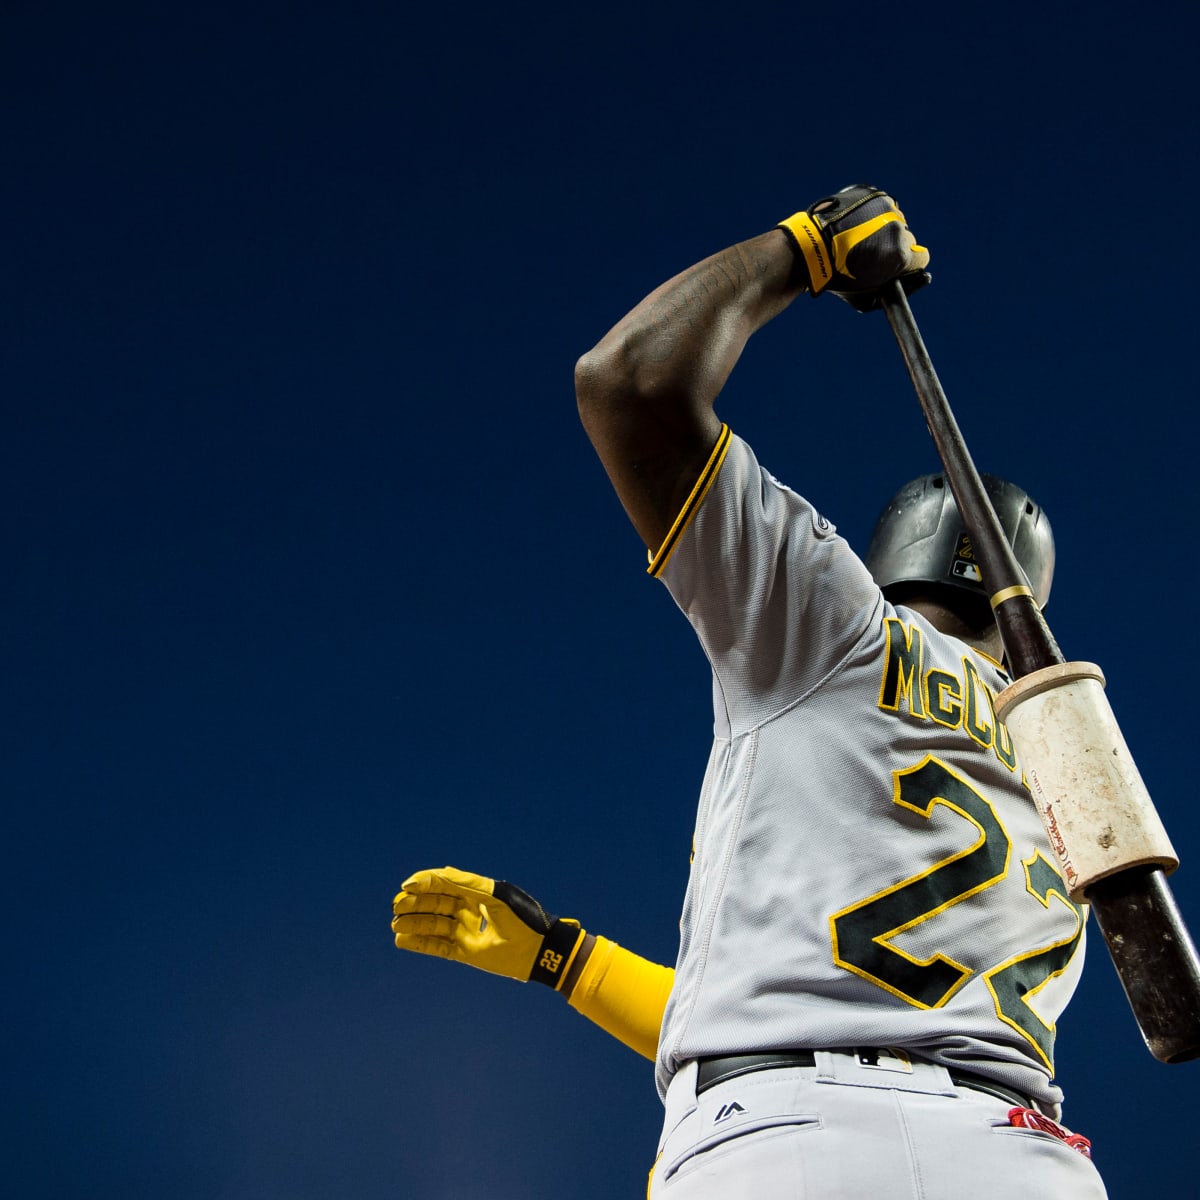 Pittsburgh Pirates: Is Josh Bell Bucs' most underrated player?